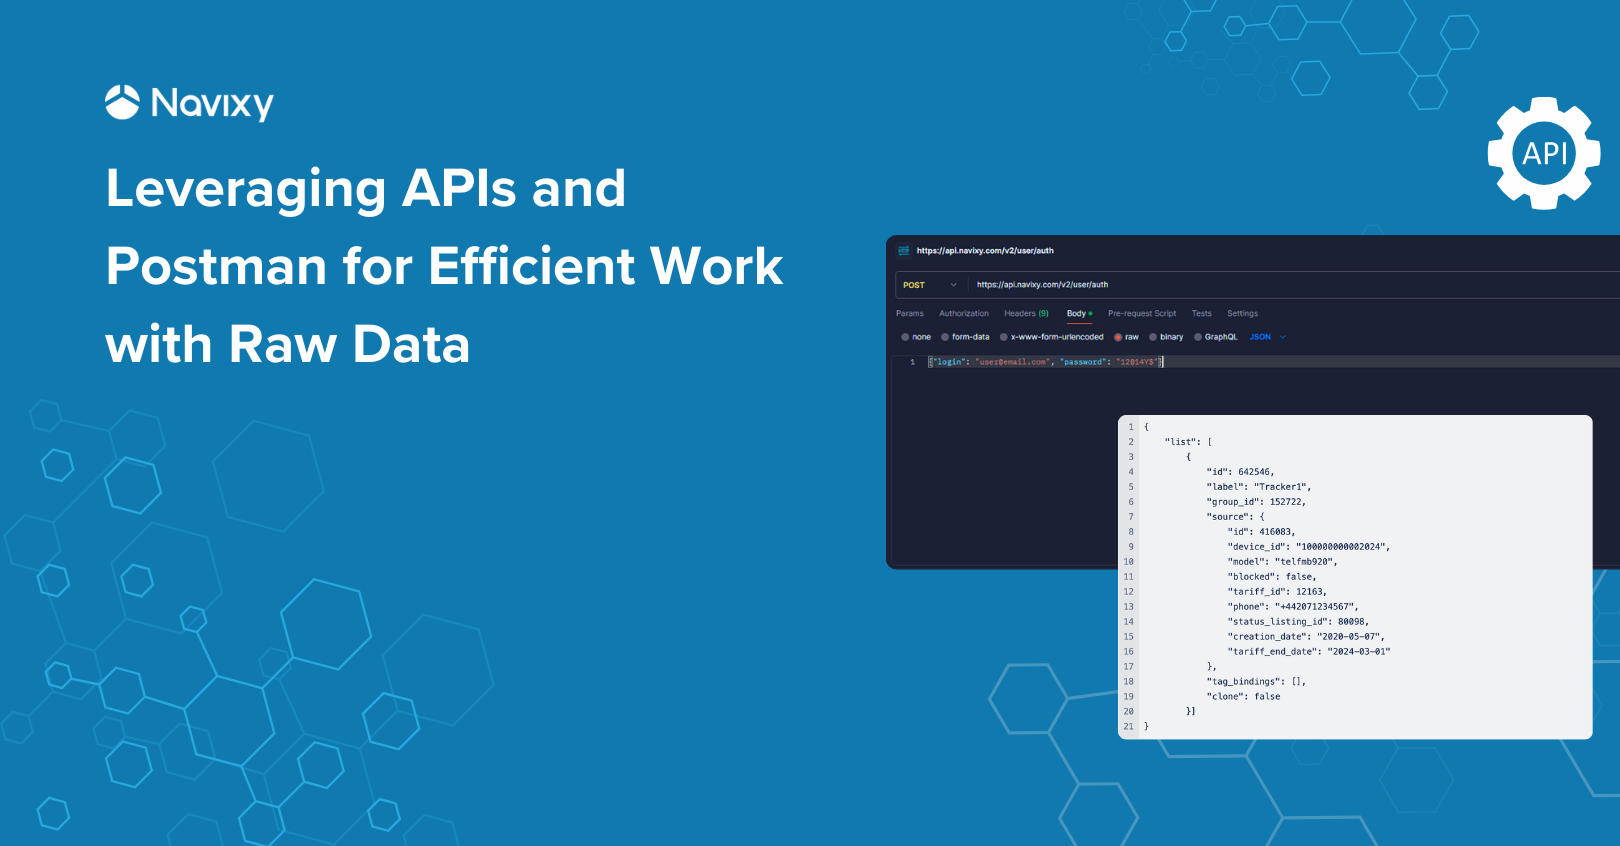 Leveraging APIs and Postman for Efficient Work with Raw Data